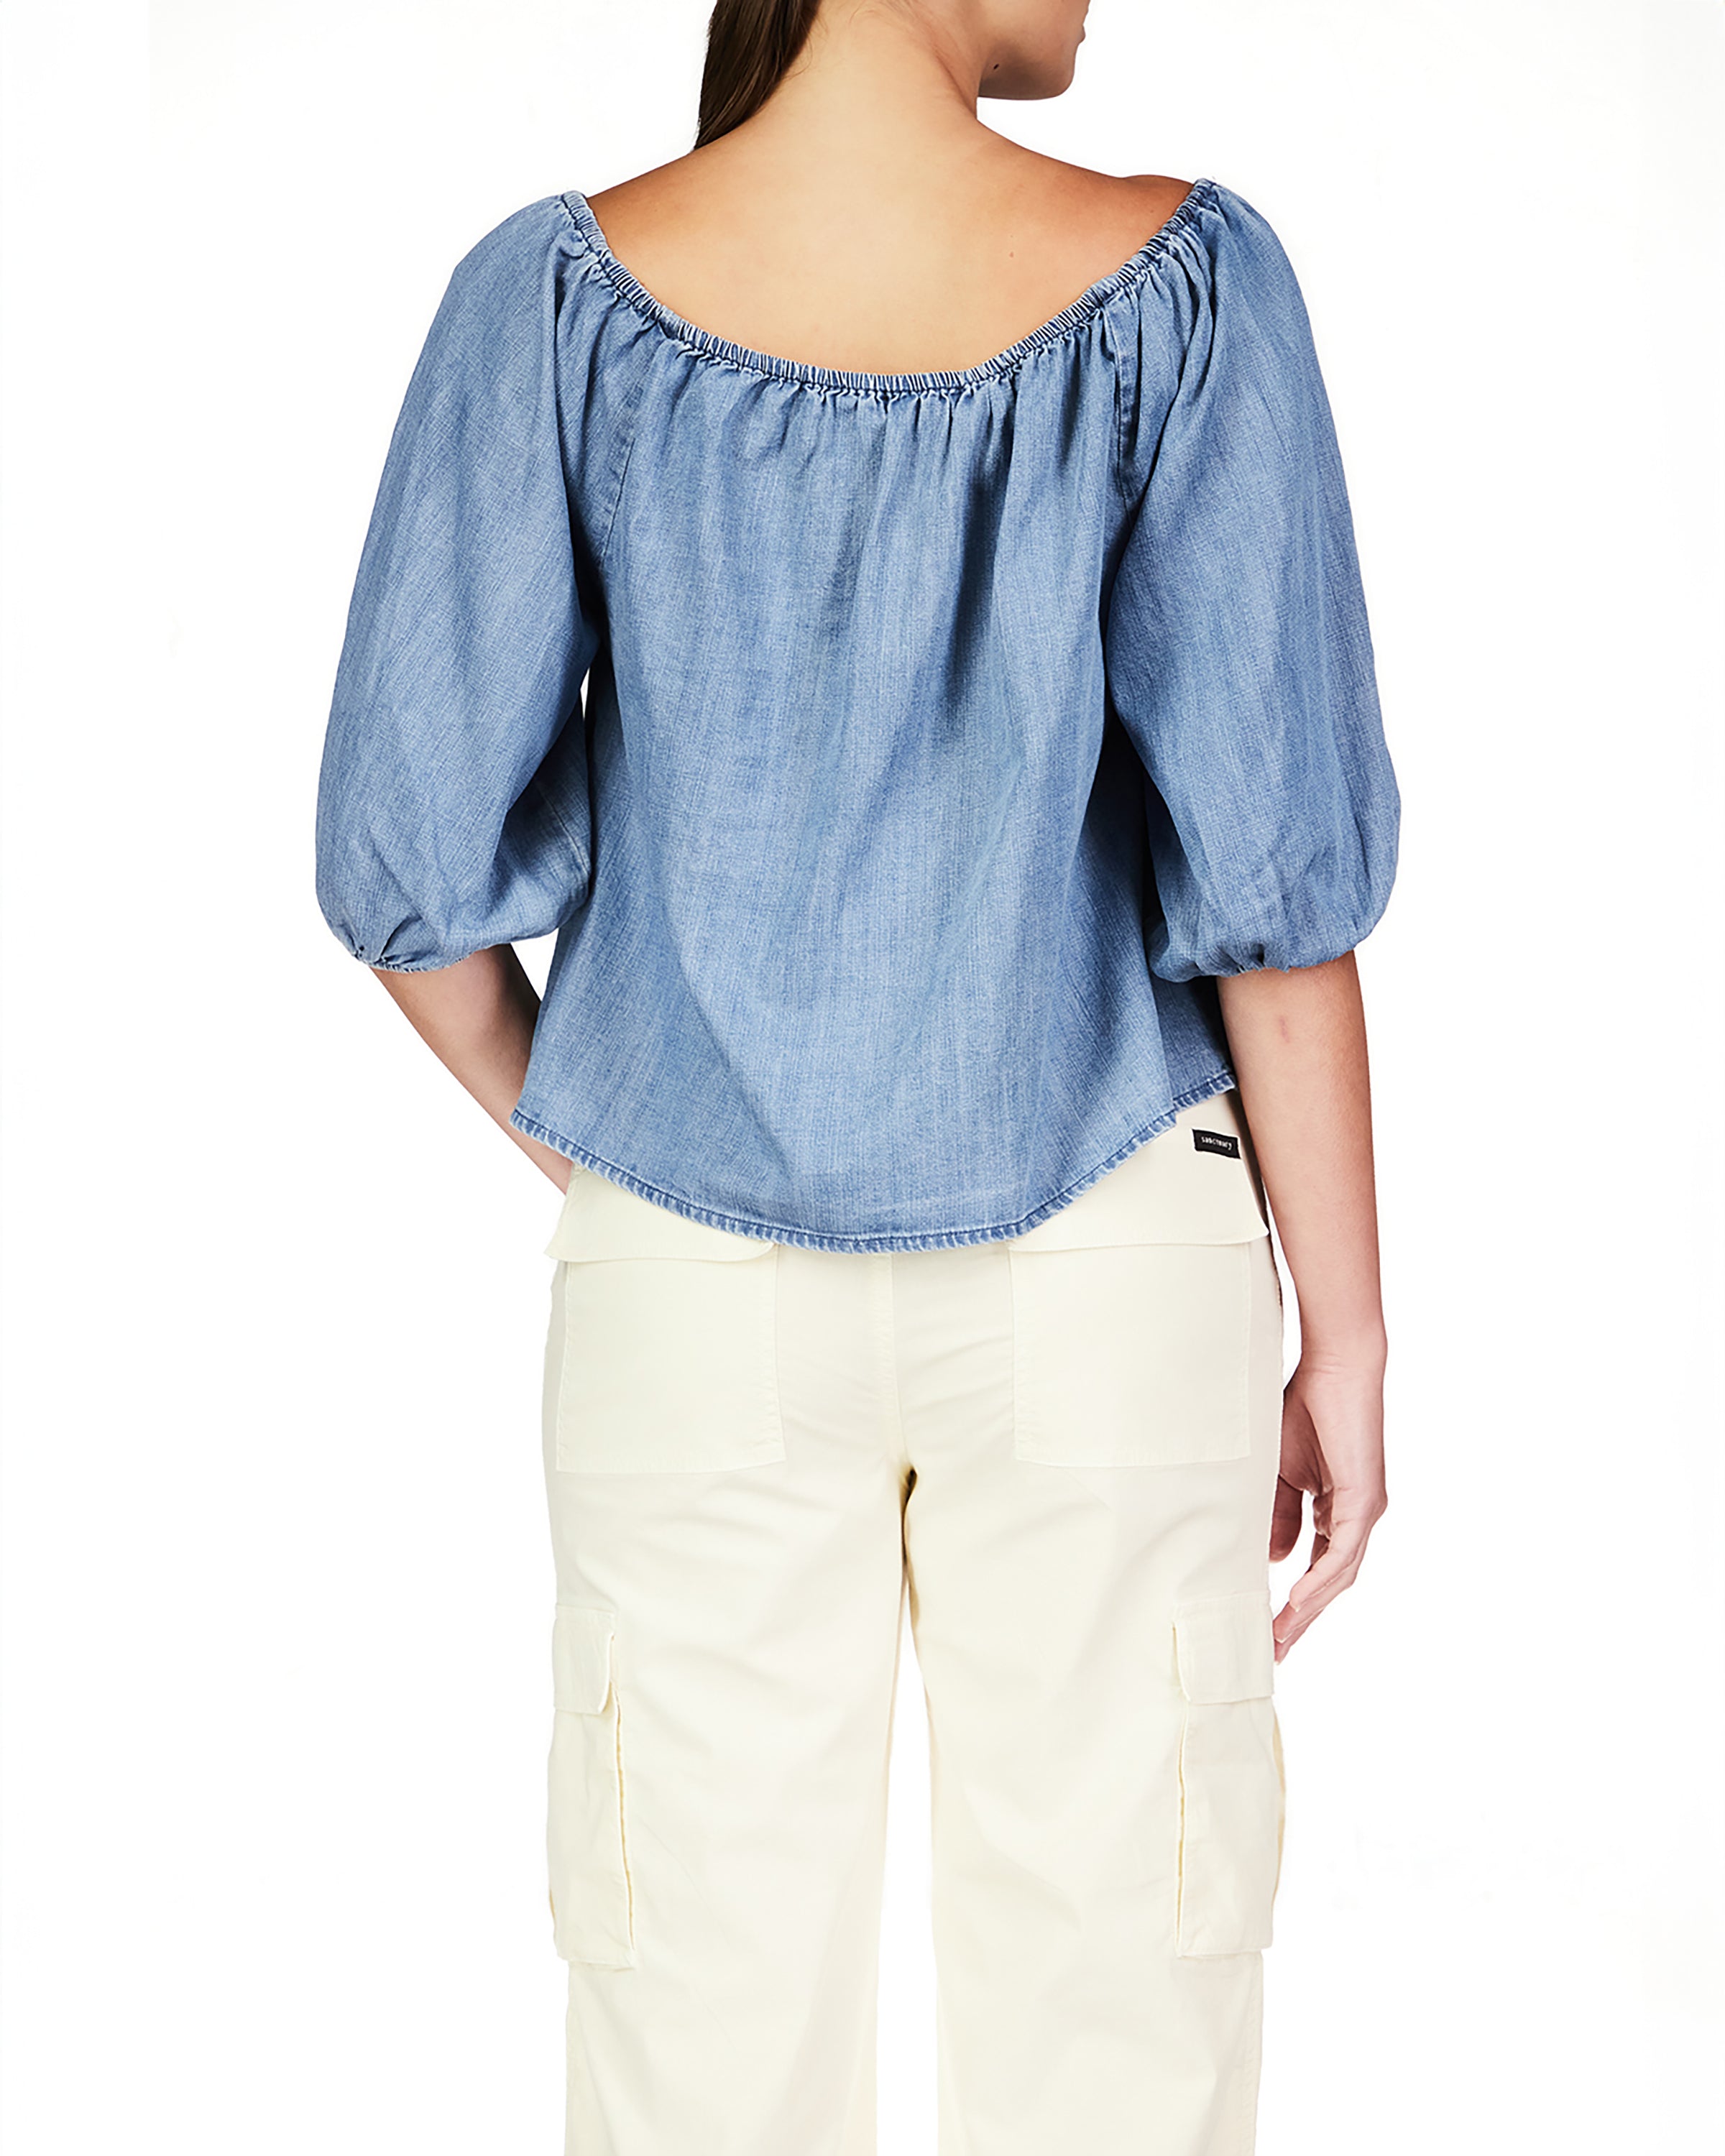 Sanctuary Beach to Bar Blouse in Bit of Blue Wash